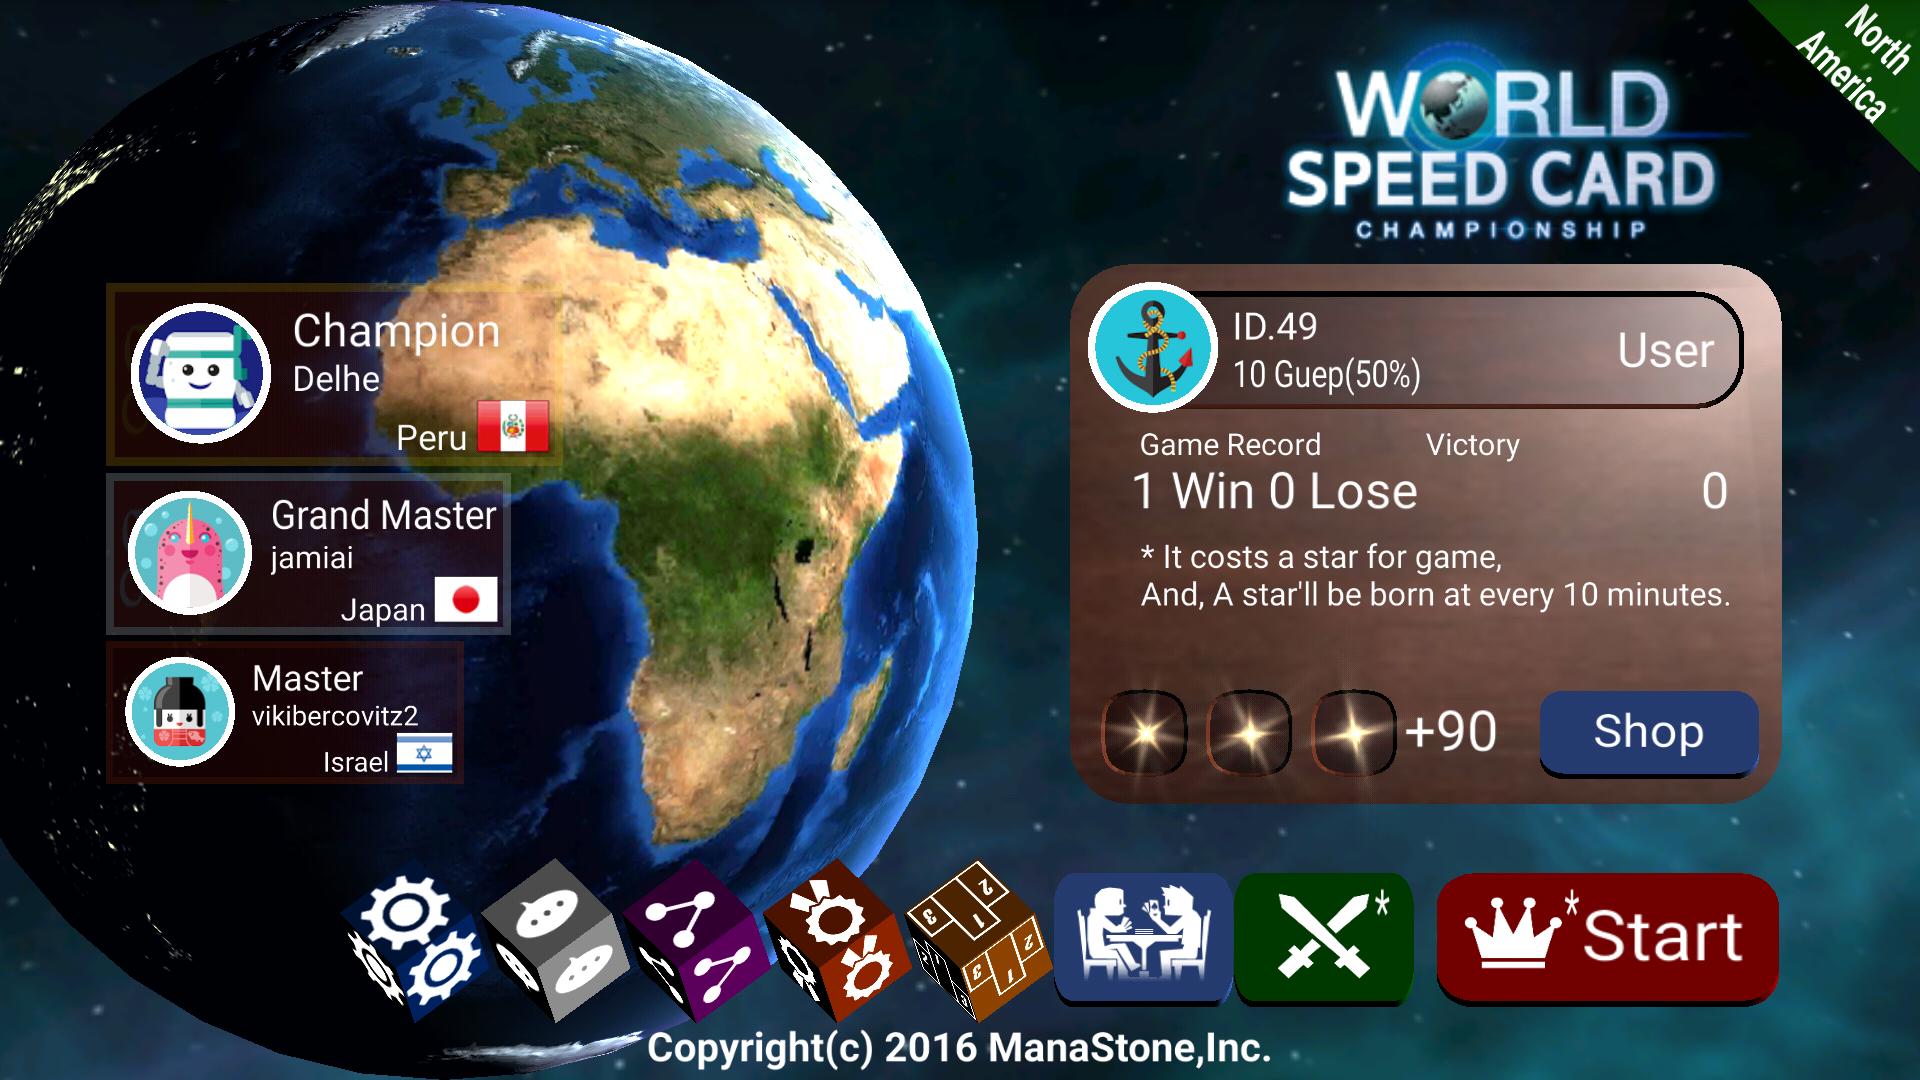 World Speed Card Championship for Android - APK Download